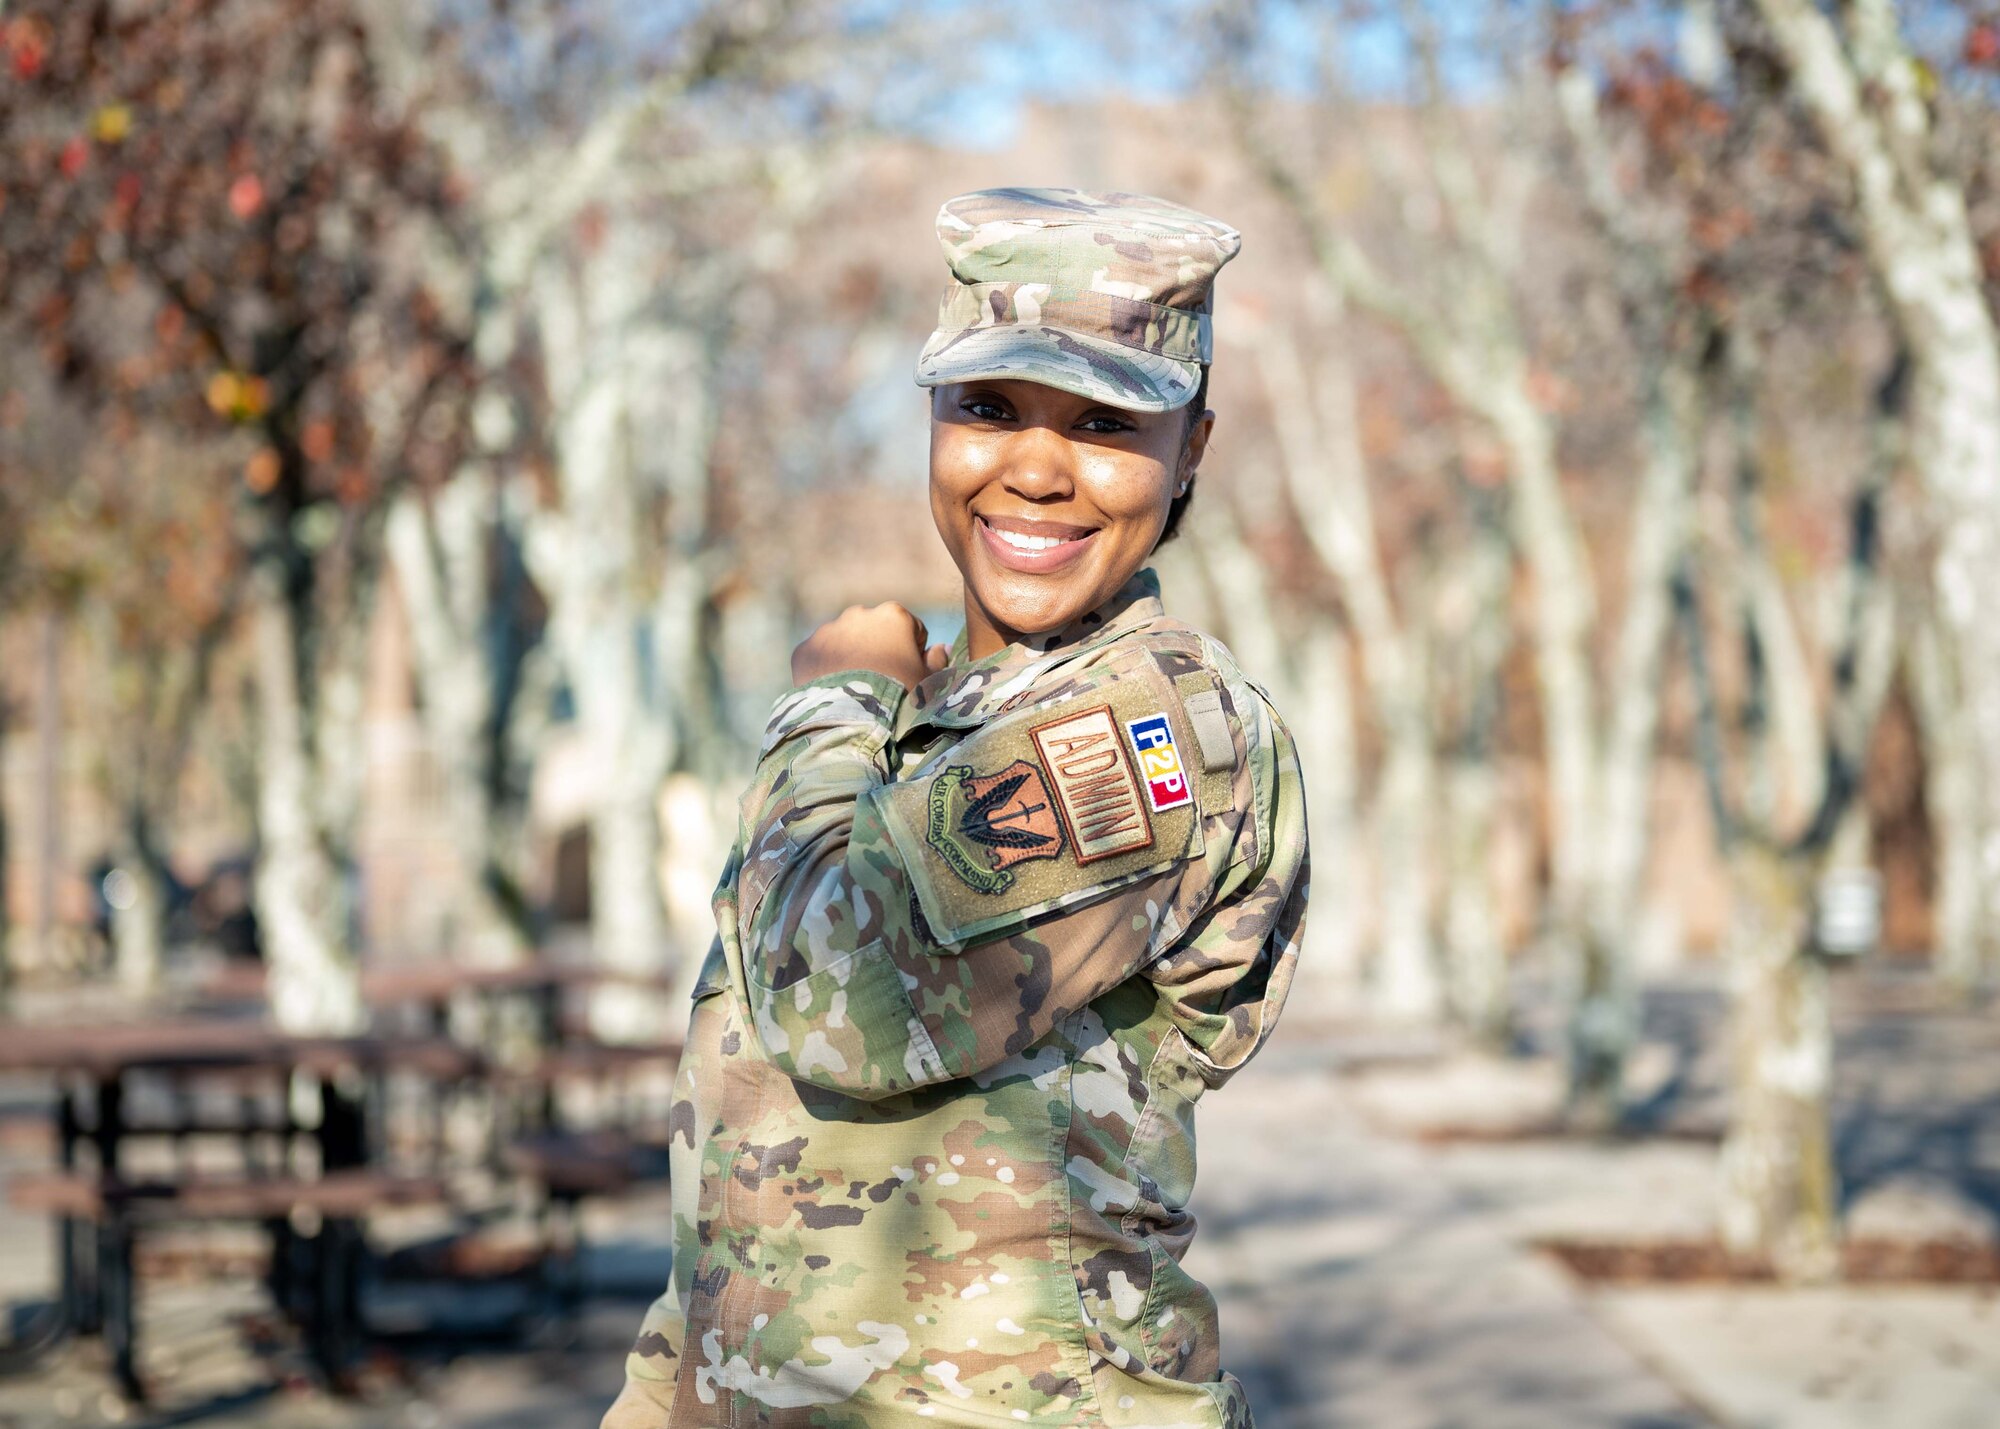 U.S. Air Force Senior Airman Mahogany Ravelo, 20th Comptroller Squadron commander support staff, poses for a photo.